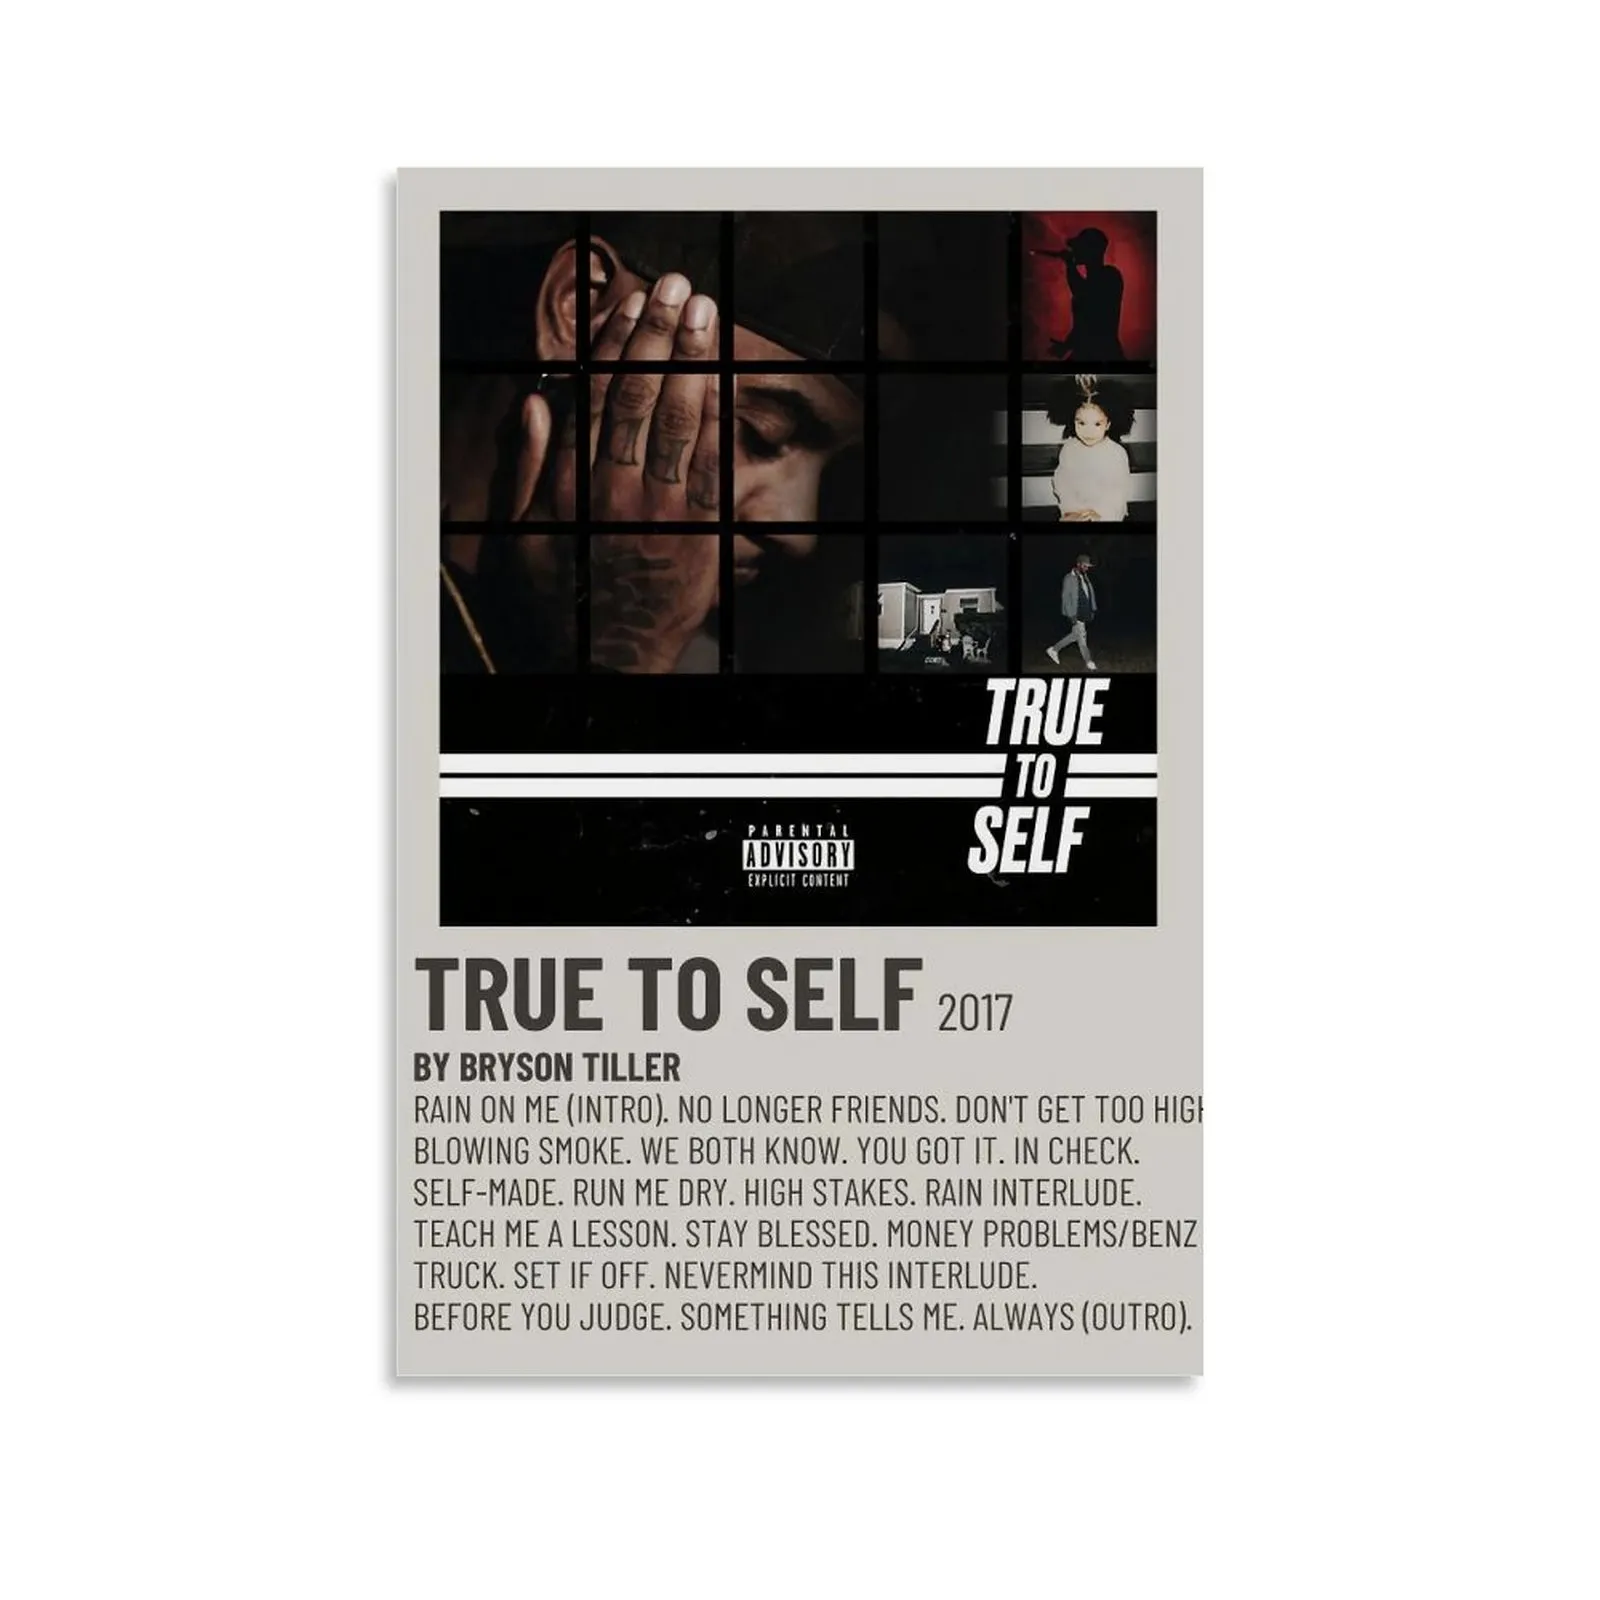 Pannello Appeso Poster Verticale BRYSON TILLER- - TRUE TO SELF- 2017 Wall Art Canvas Doth Posters